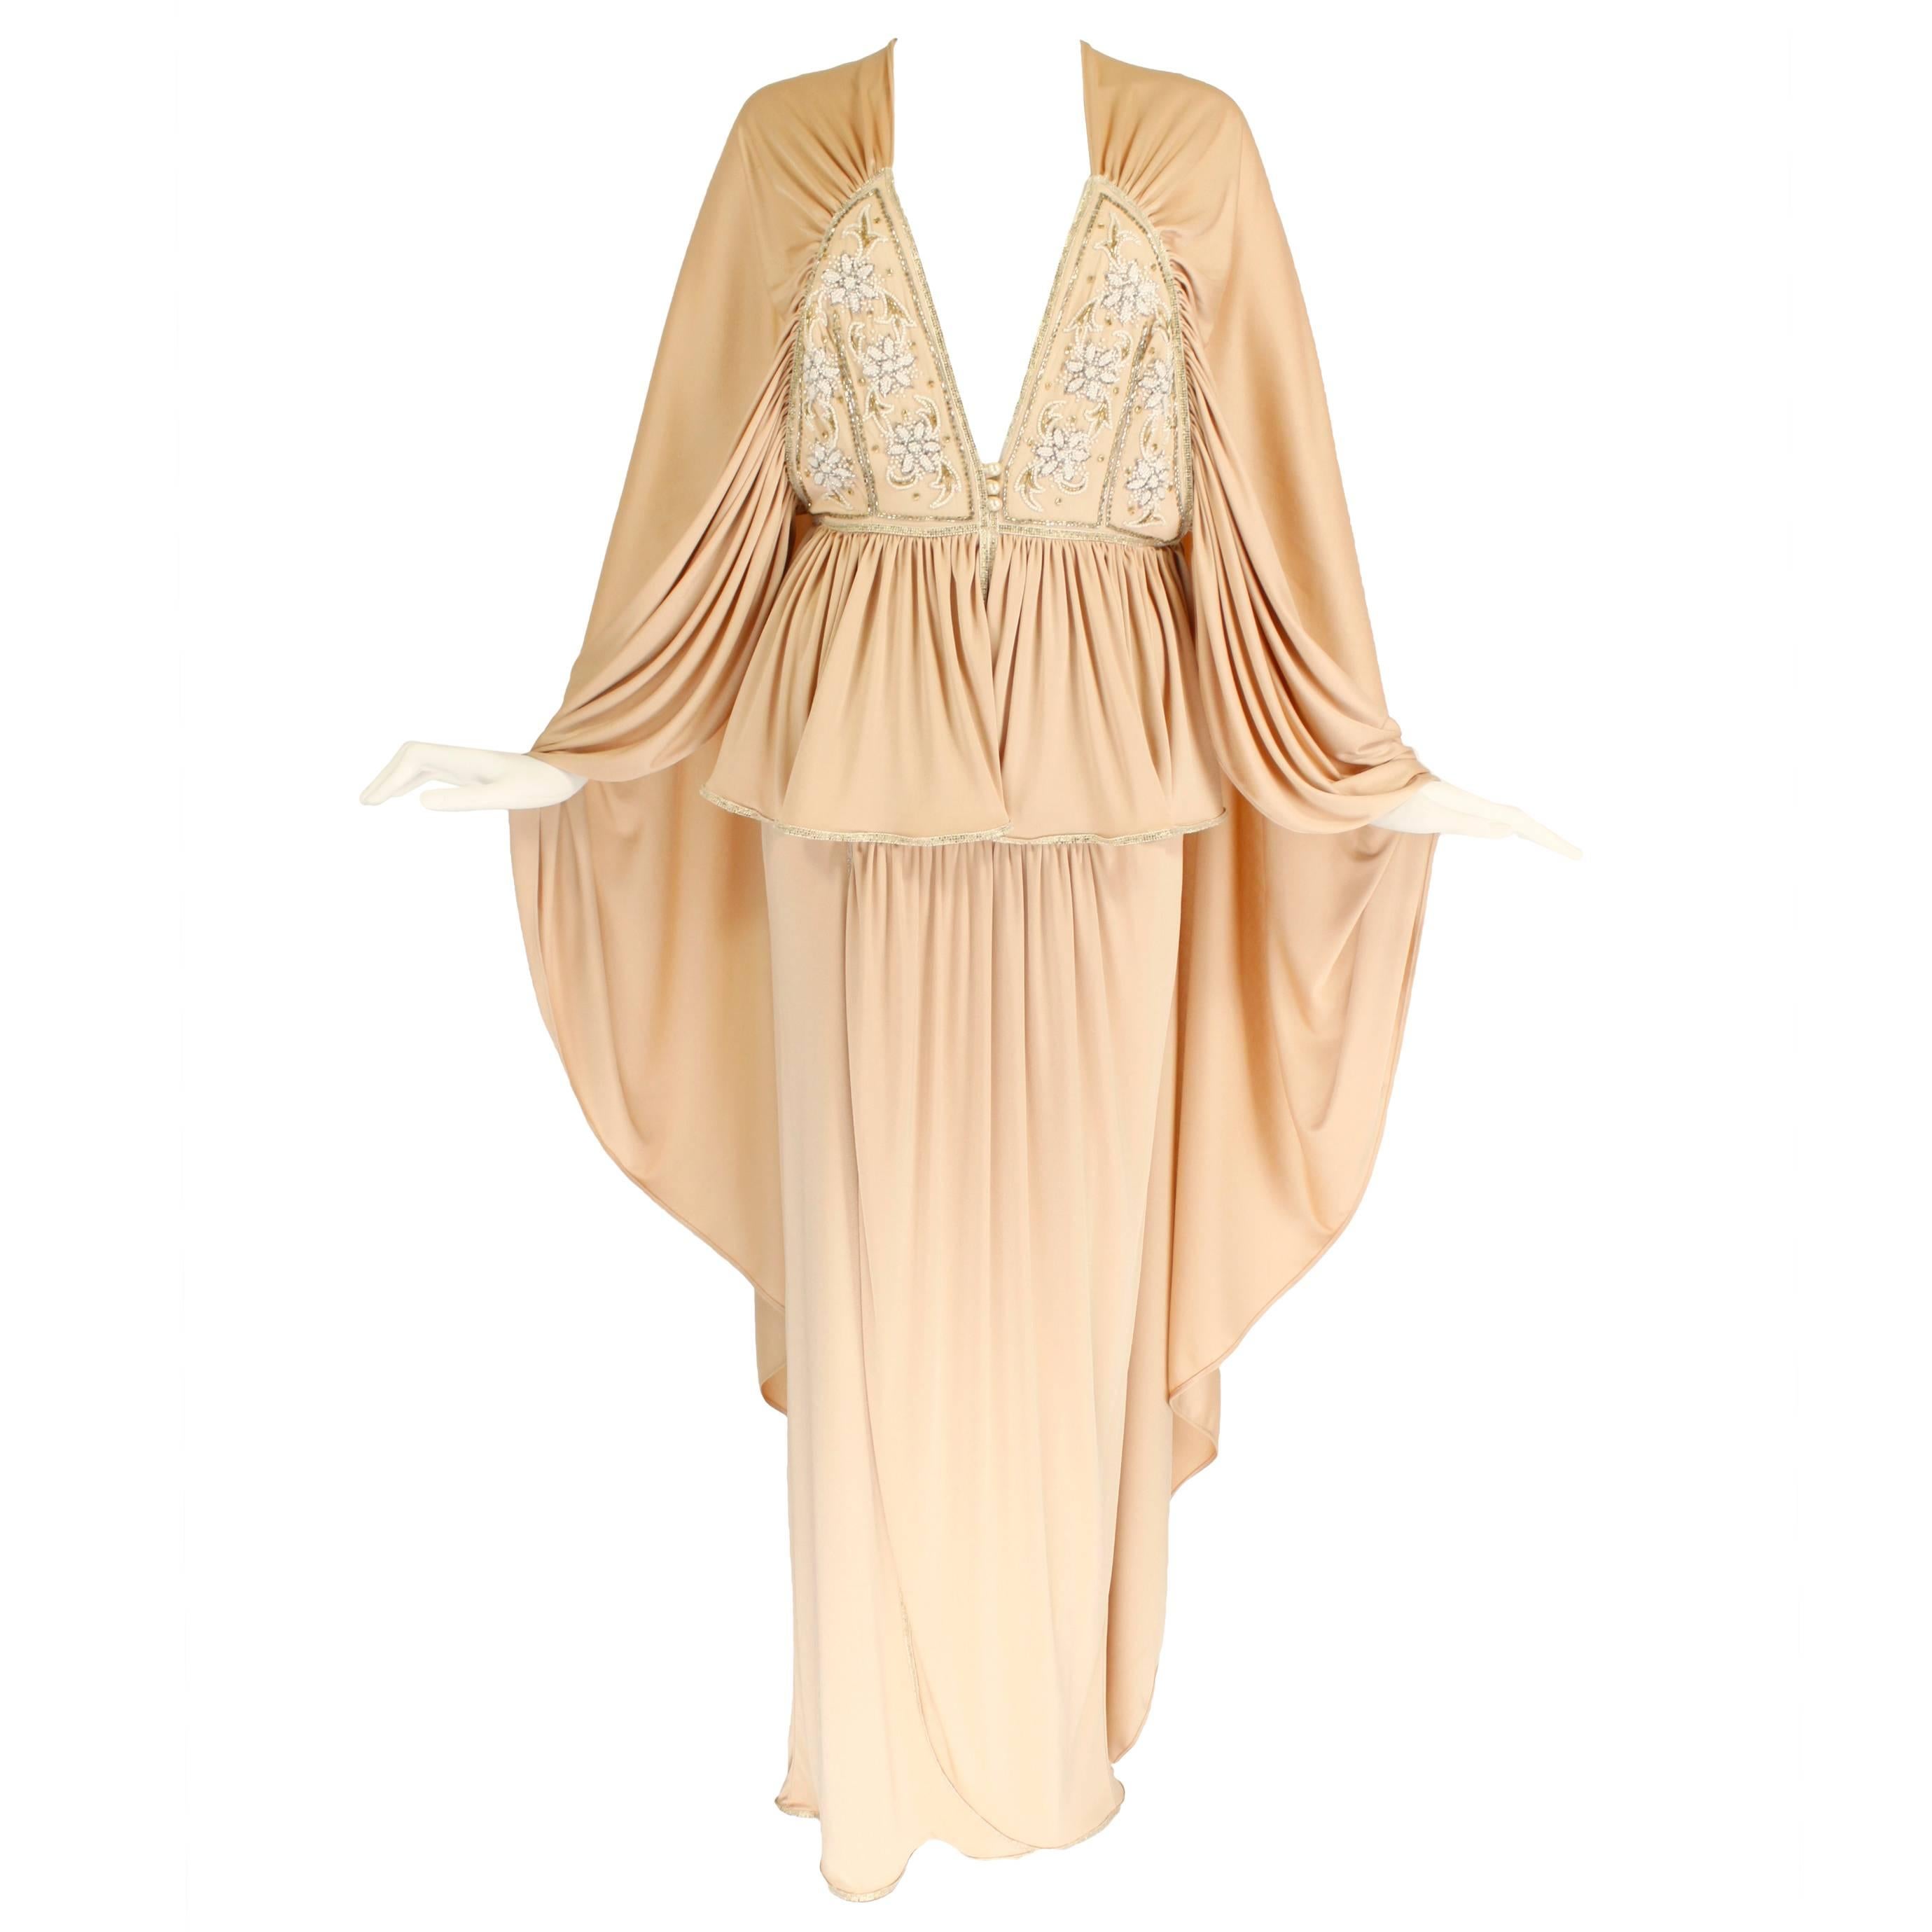 1970s Bill Gibb Ethereal Gown with Floral Beading and Plunging Neckline